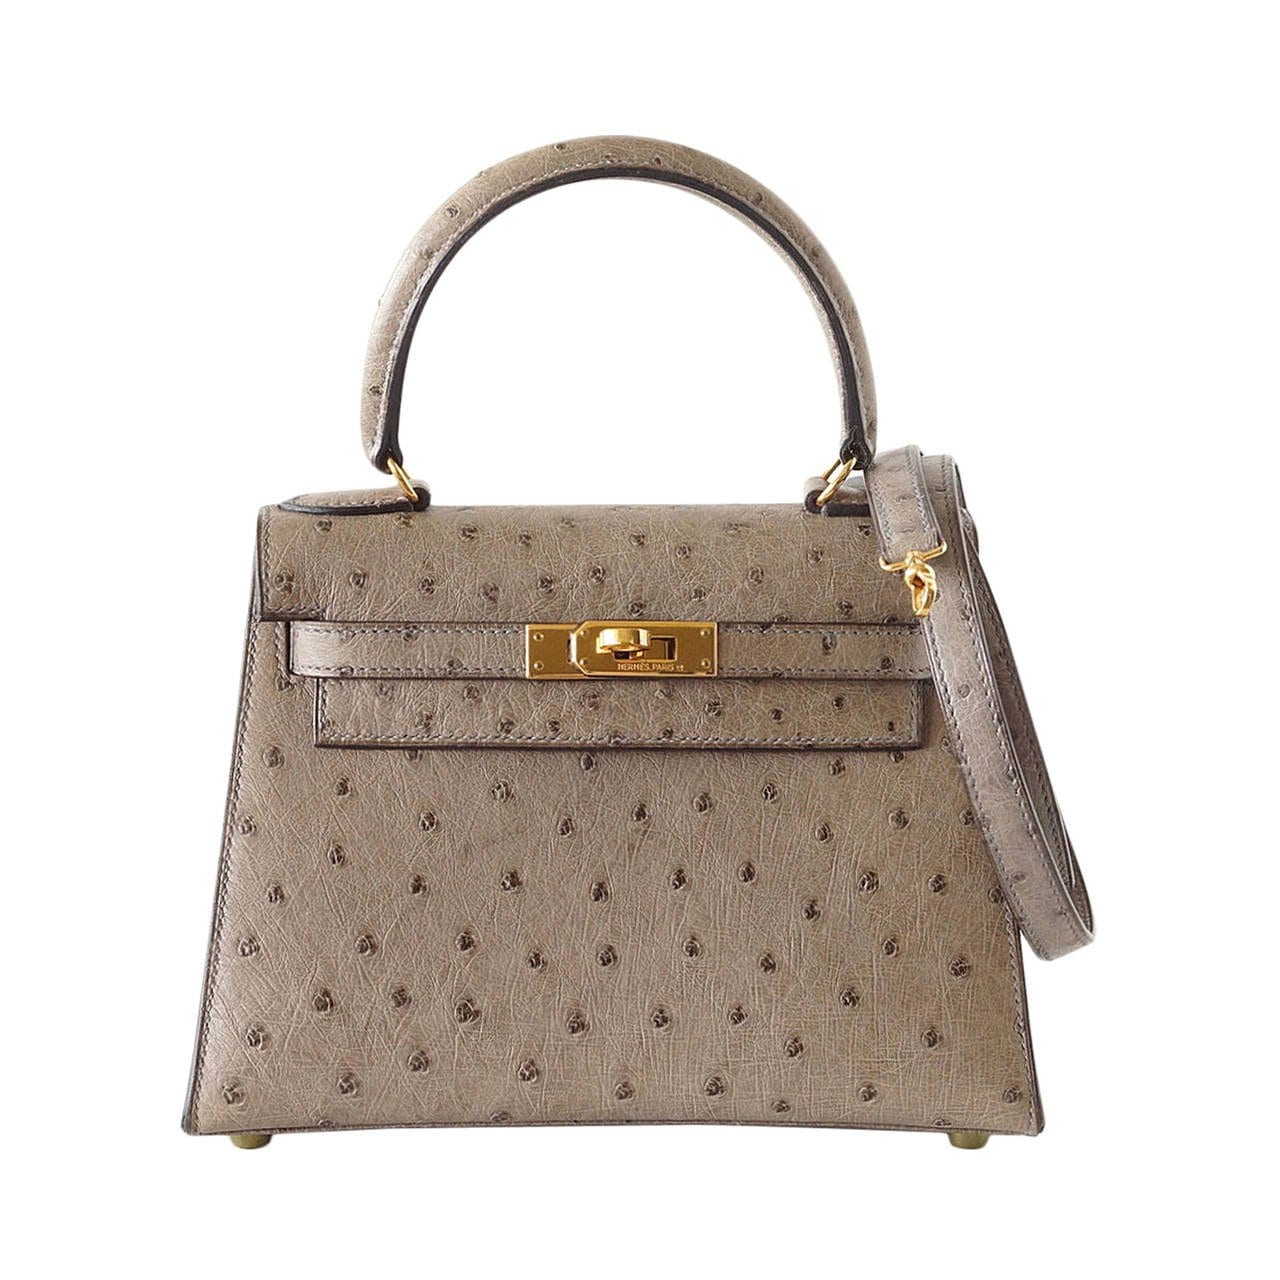 Hermes Kelly 20 bag Vintage Gray Ostrich Mini gold hardware mint - mightychic